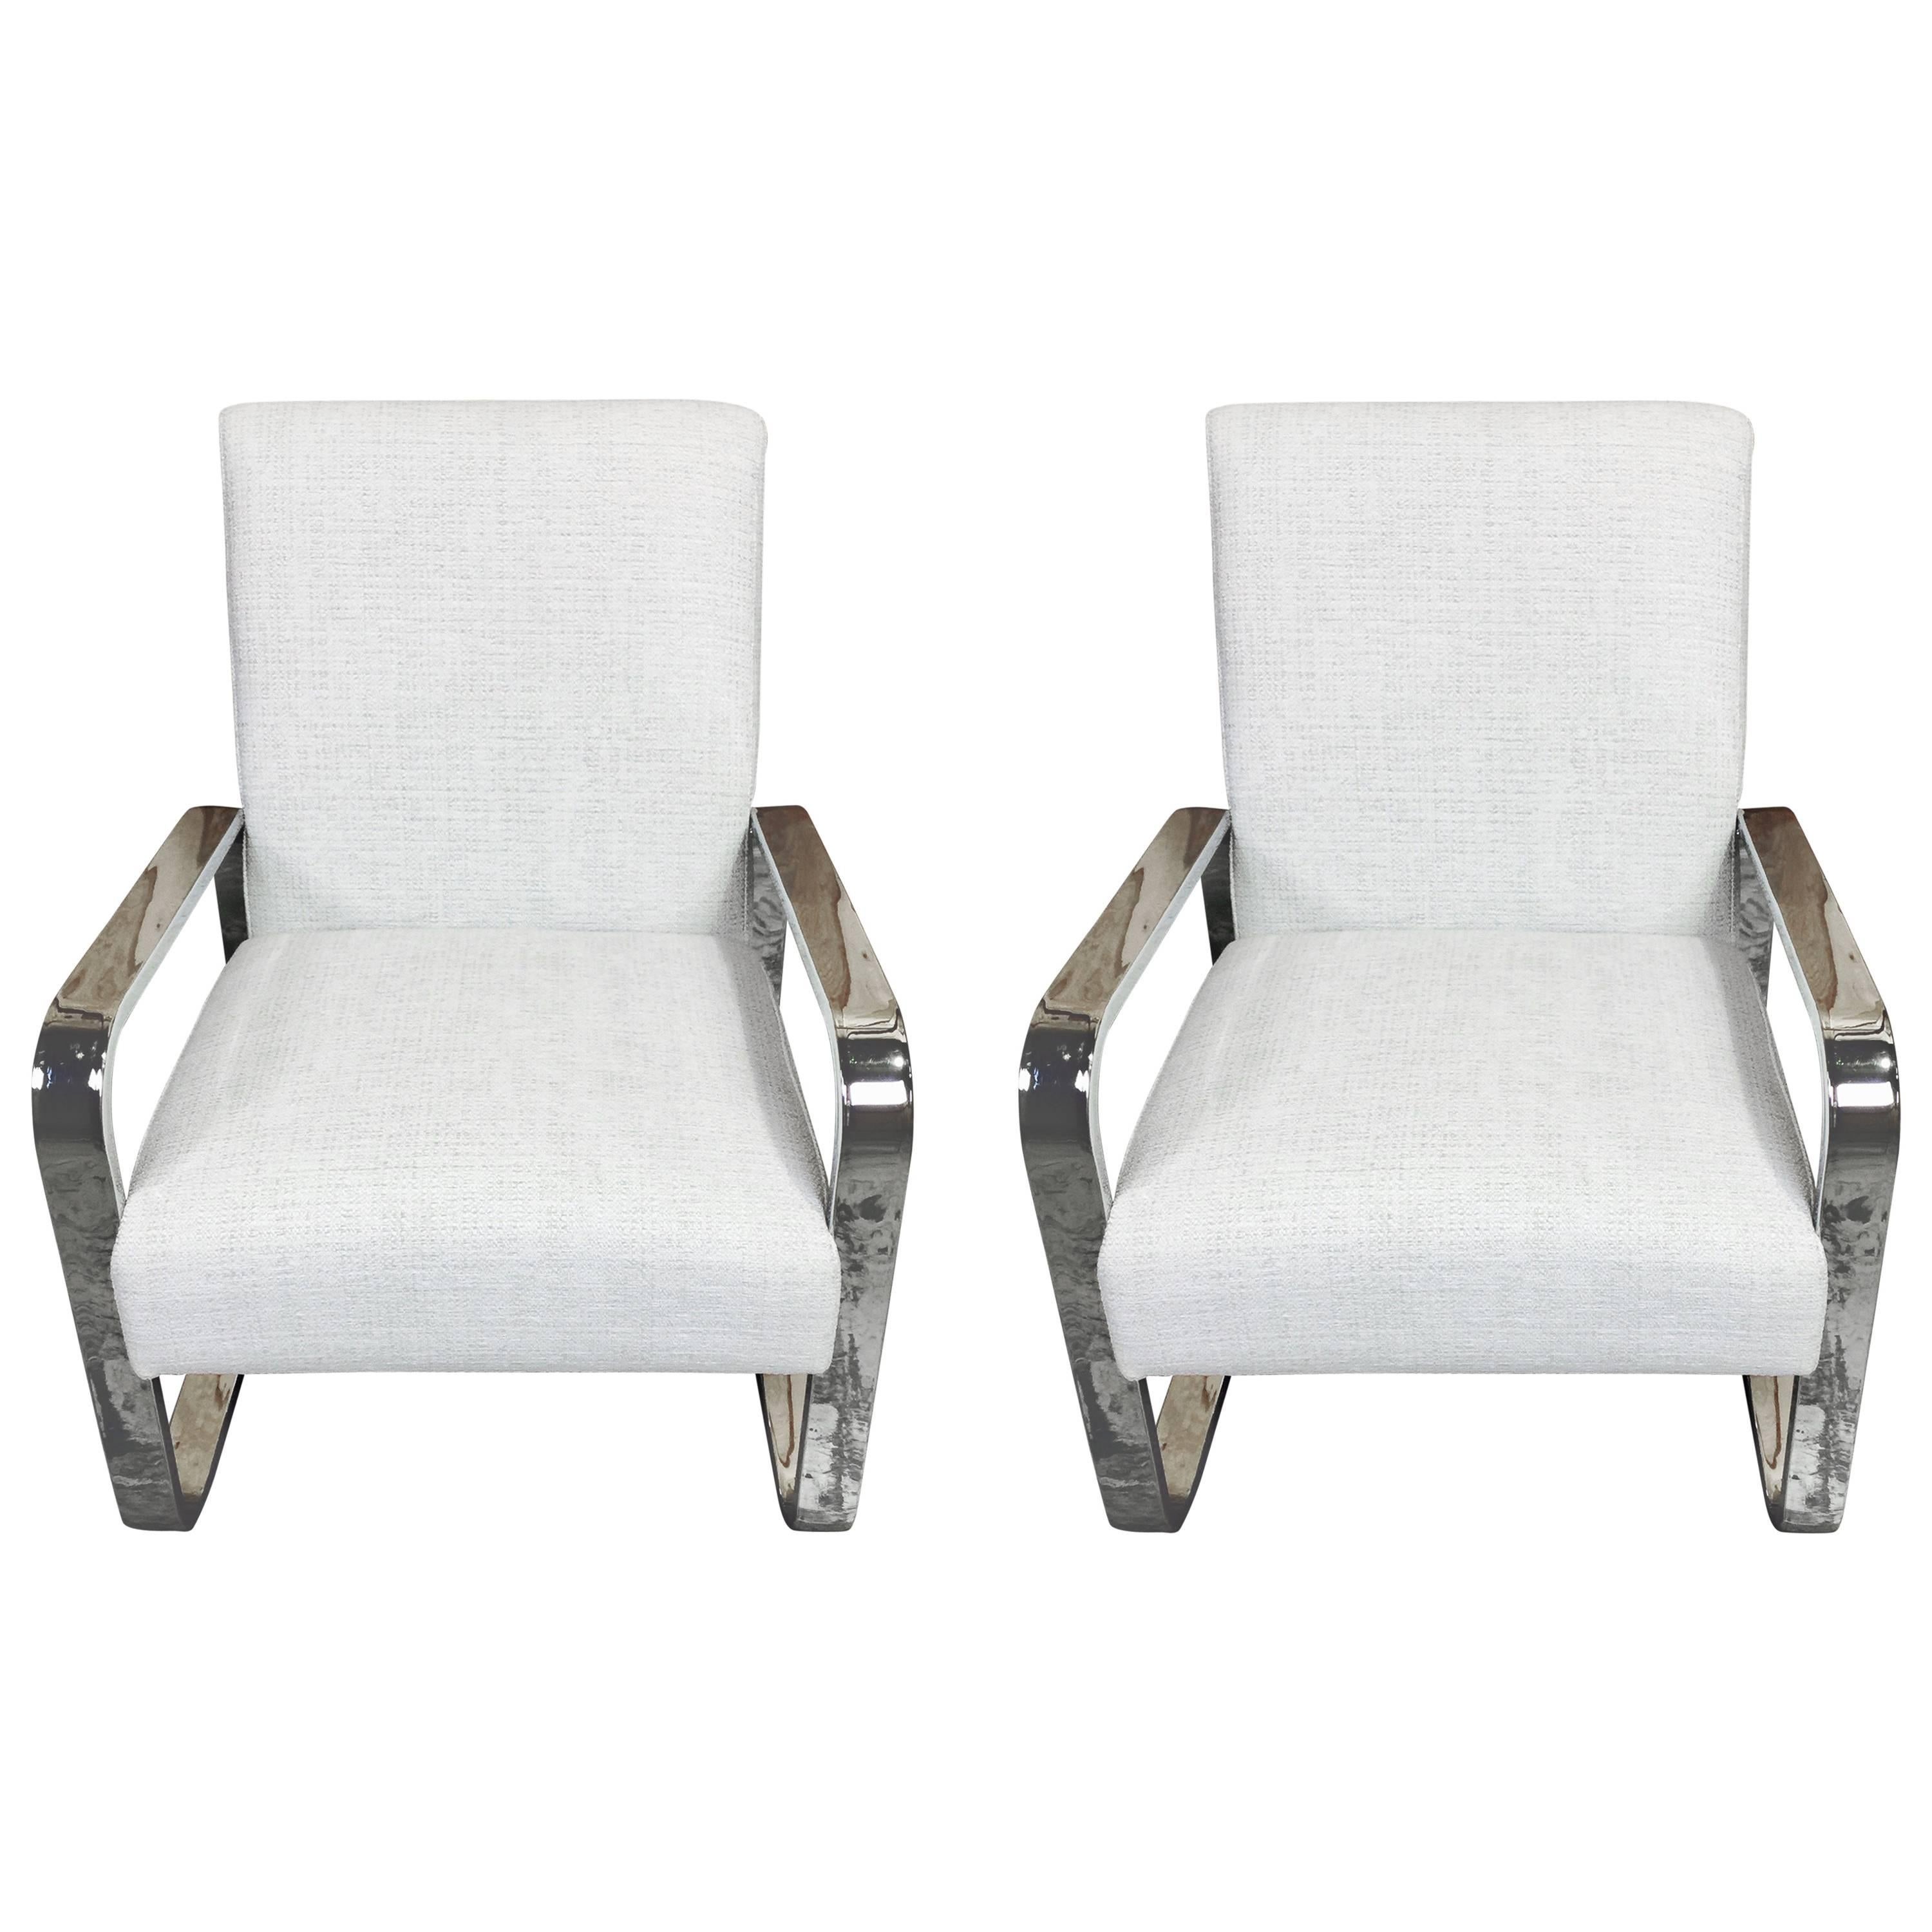 Pair of Mid-Century Upholstered Club Chairs with Polished Chrome Frame